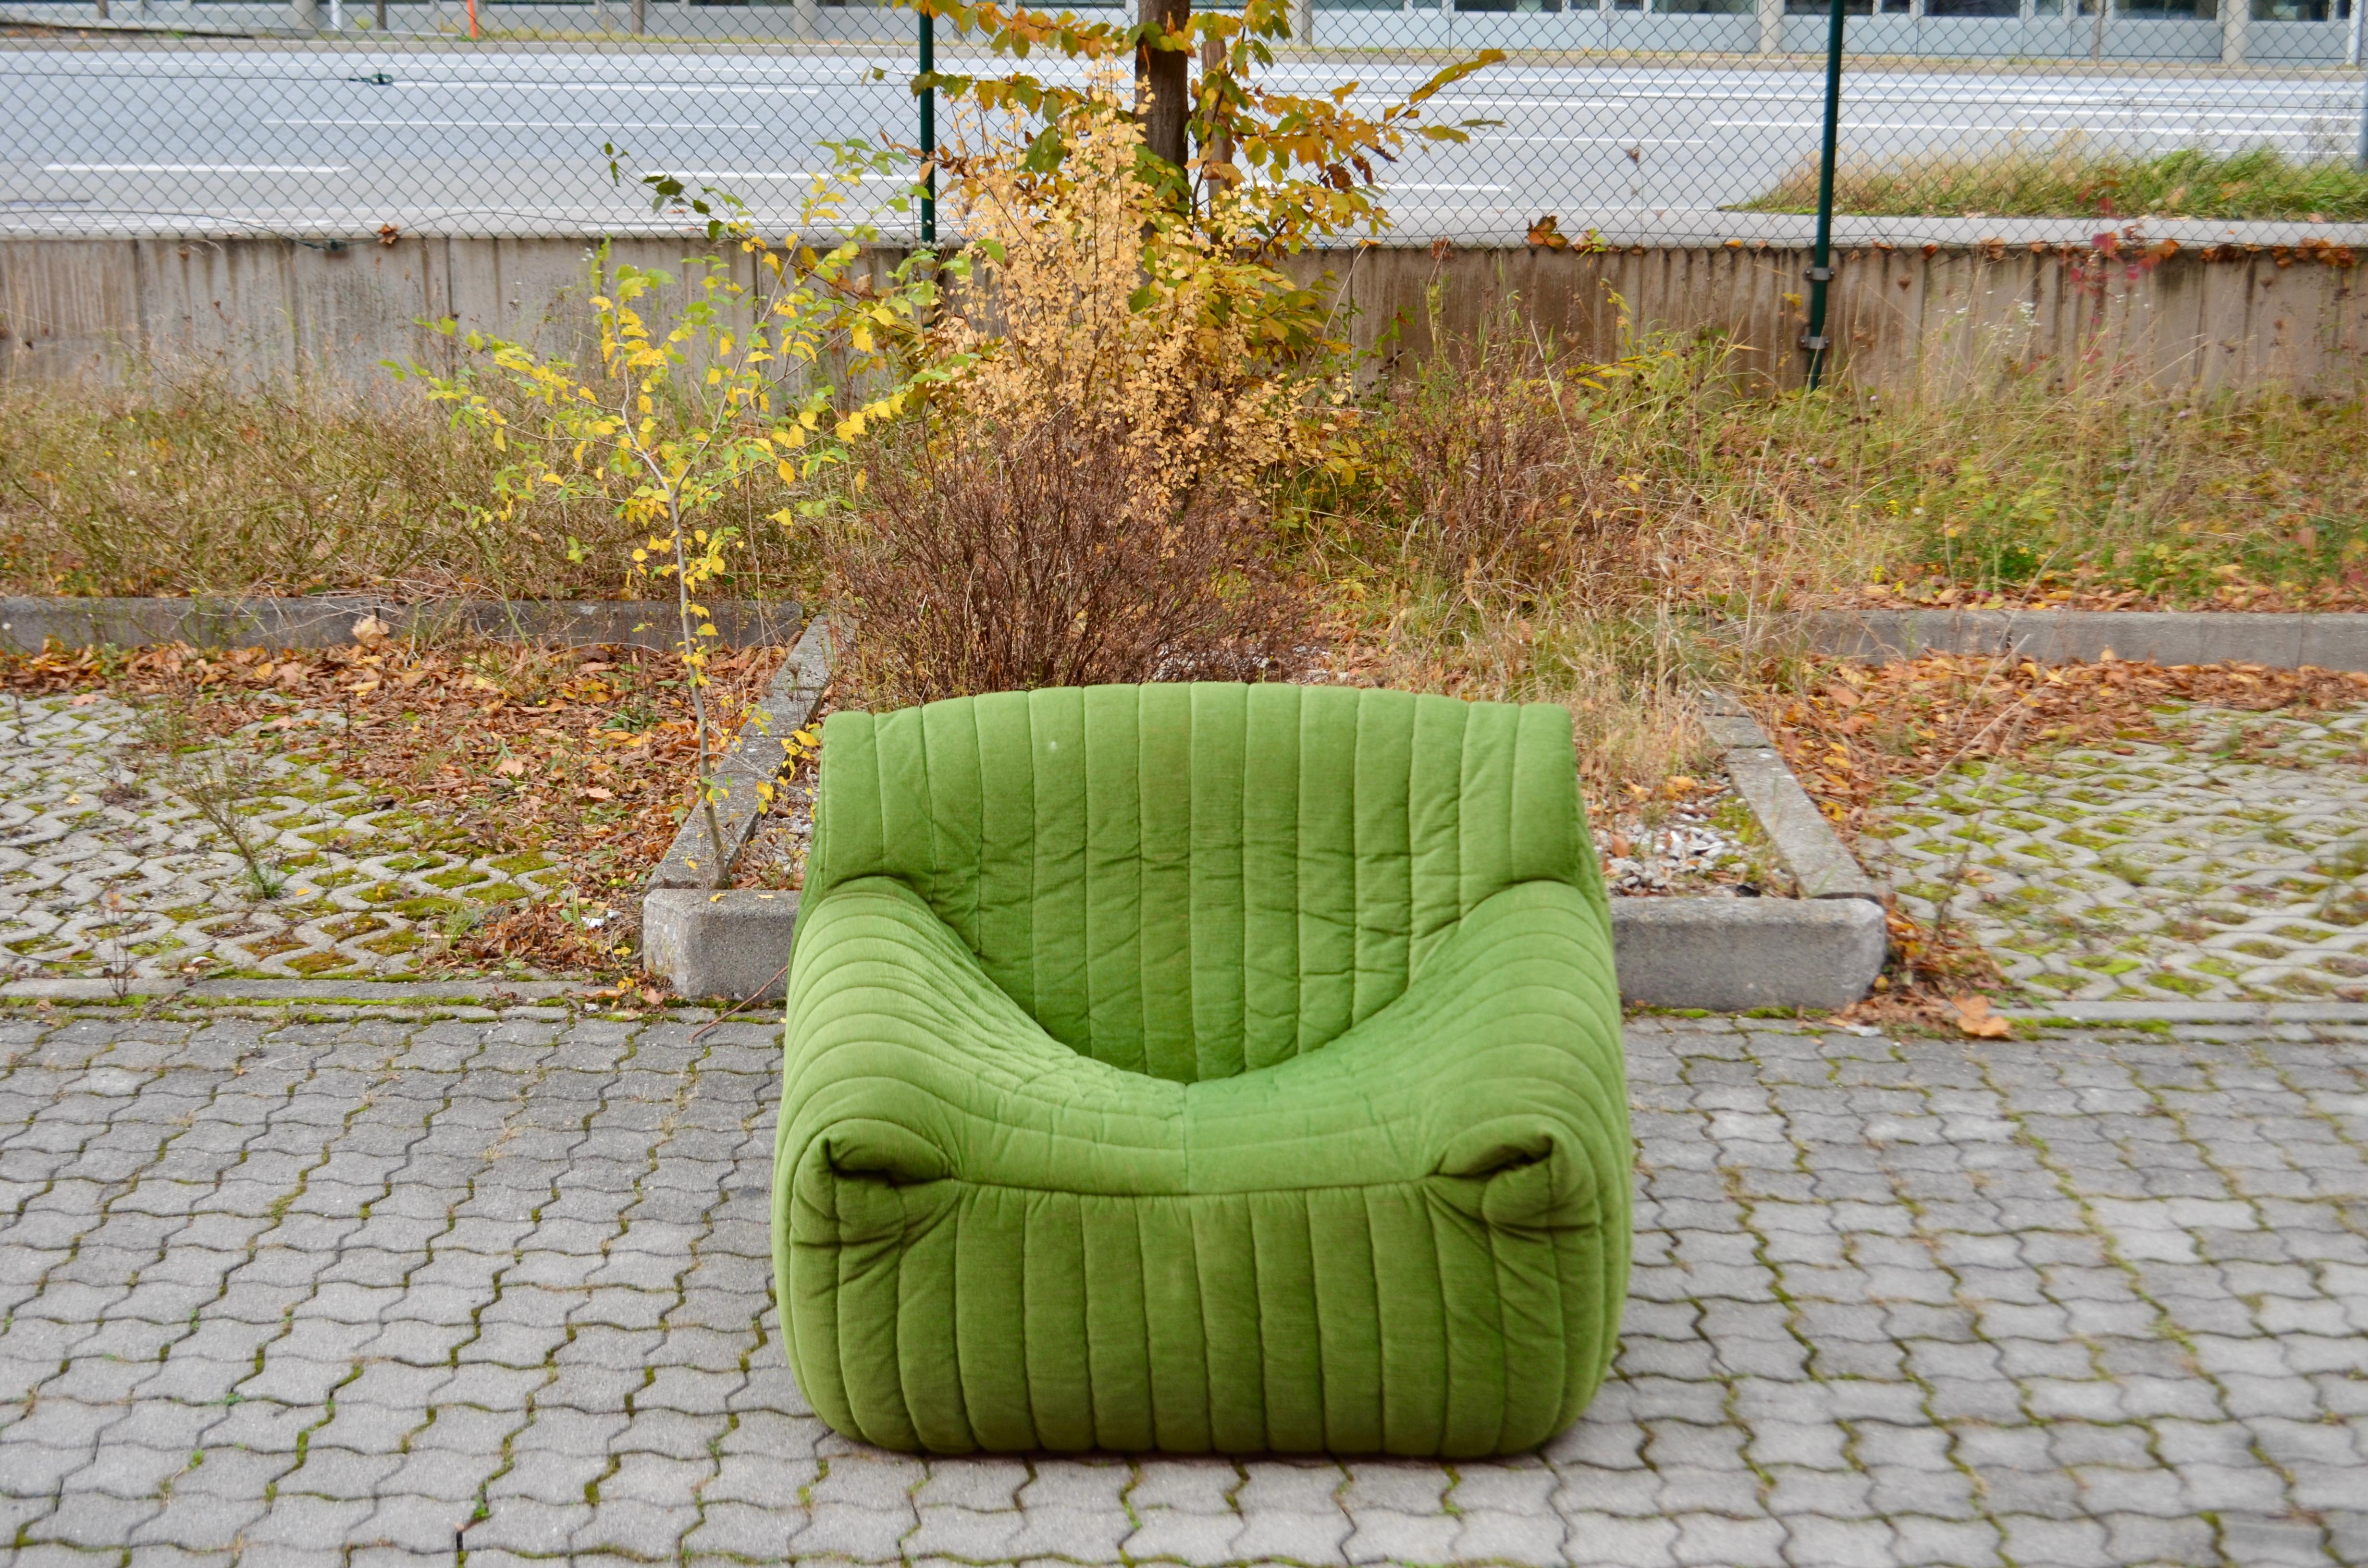 Cinna / Ligne Roset model Sandra designed by Annie Hieronimus.
This is the Chair Version.
The fabric has a stripe design, a truly 1970s design.
The colour is stunning lime green and has a soft velours structure.
On the fabric there are 2 little